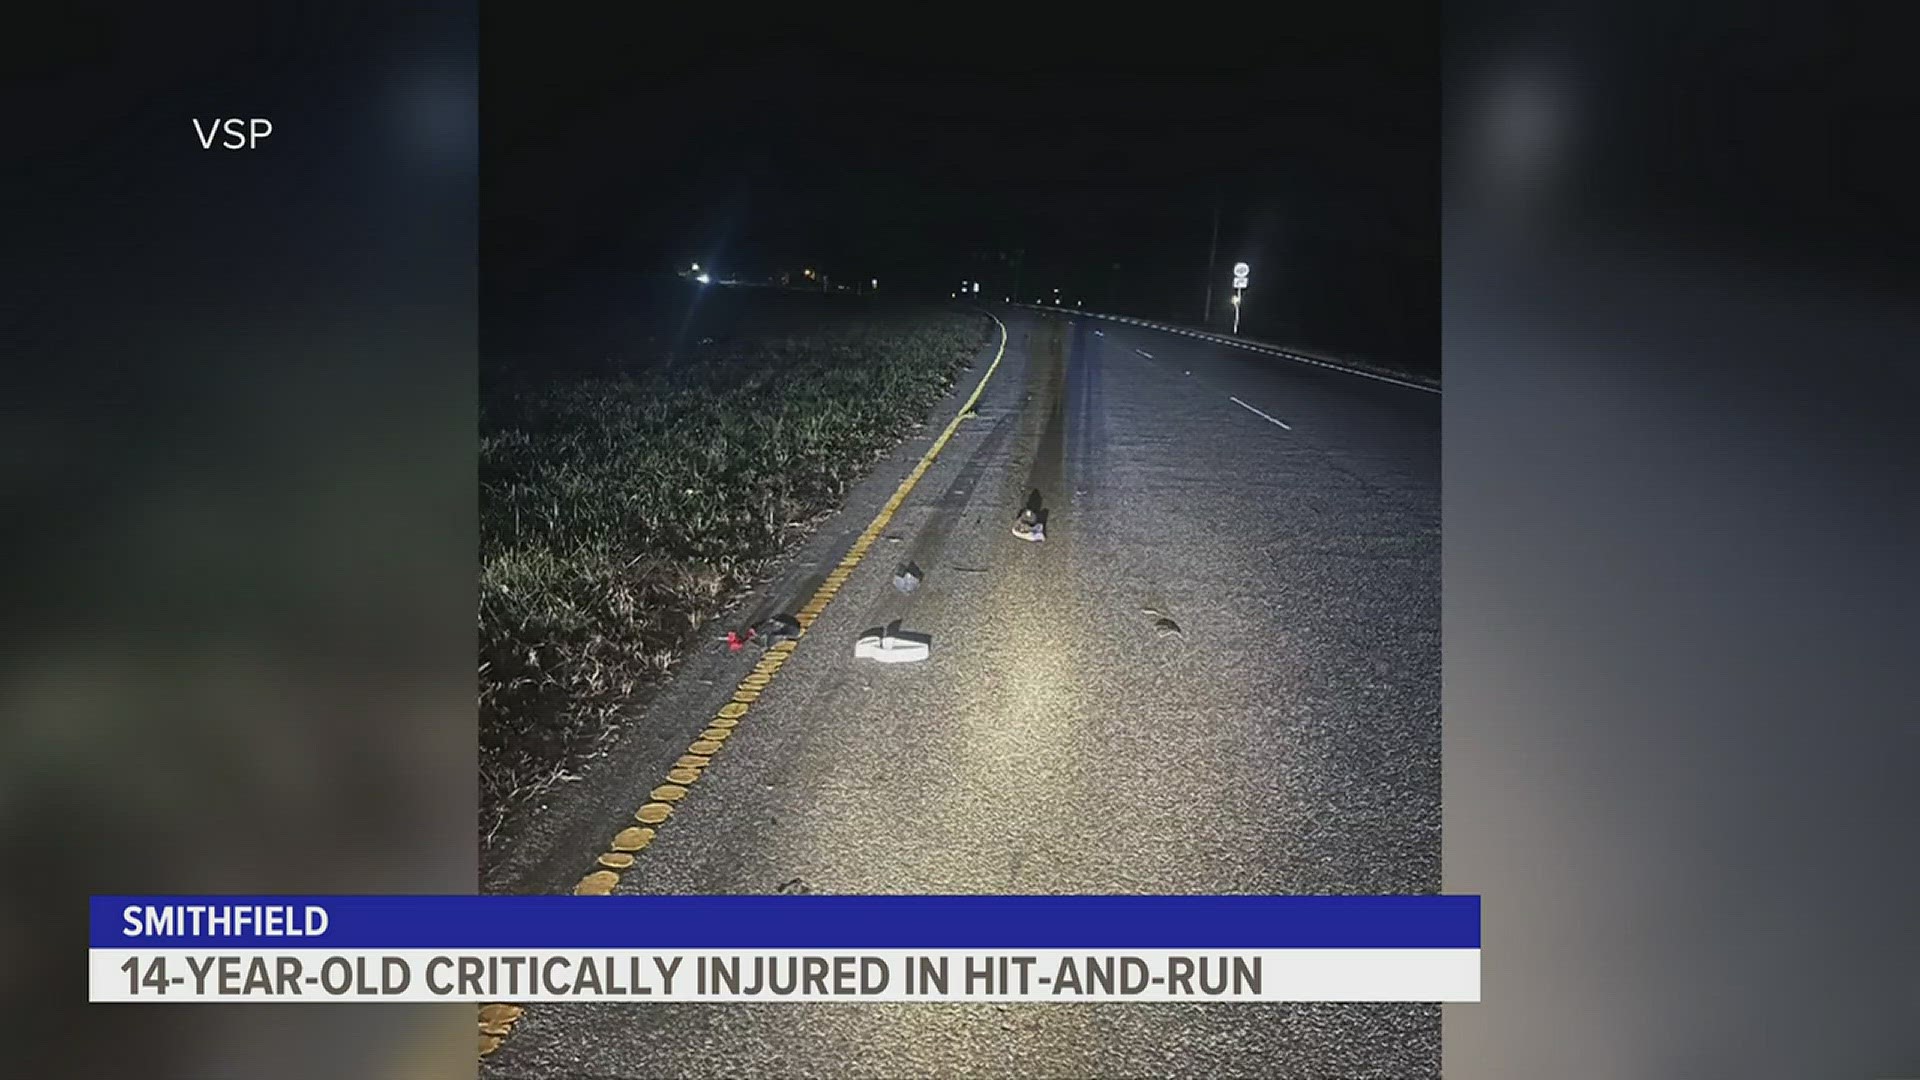 A 14-year-old boy is fighting for his life after someone struck him with a car and fled the scene in Isle of Wight County early Saturday morning.